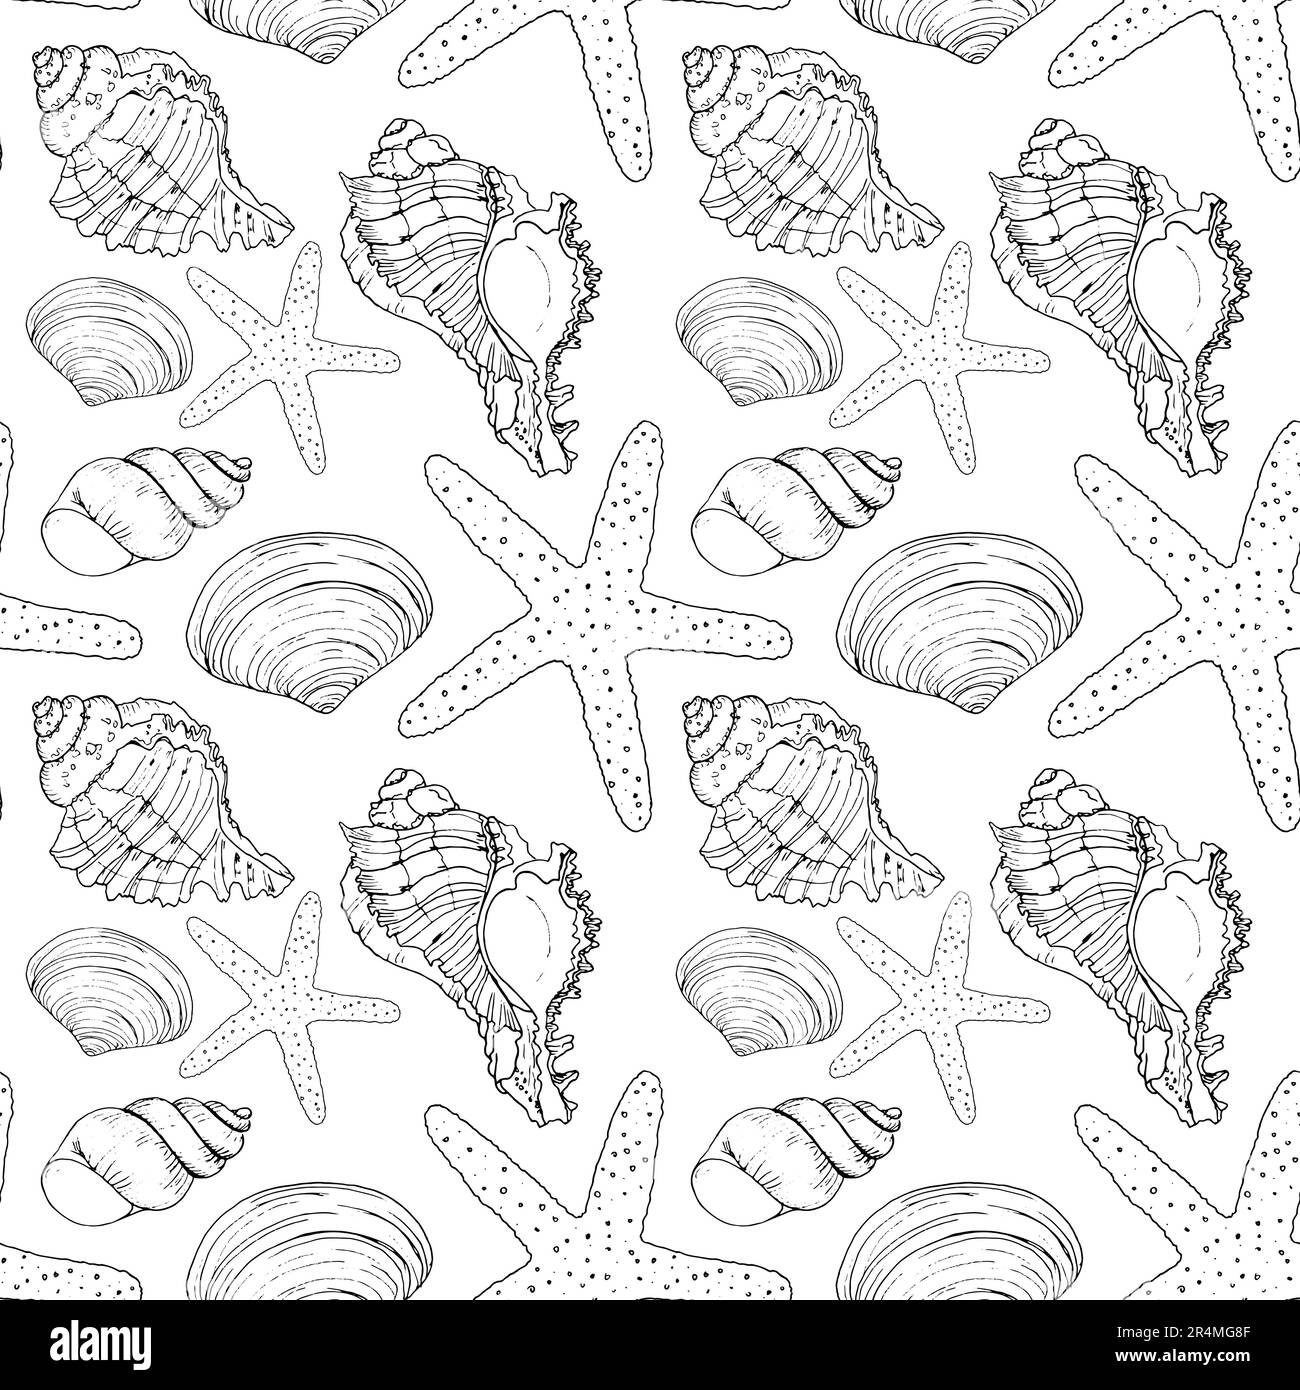 Hand drawn vector illustrations - seamless pattern of seashells. Marine background. Perfect for invitations, greeting cards, posters, prints, banners, Stock Photo